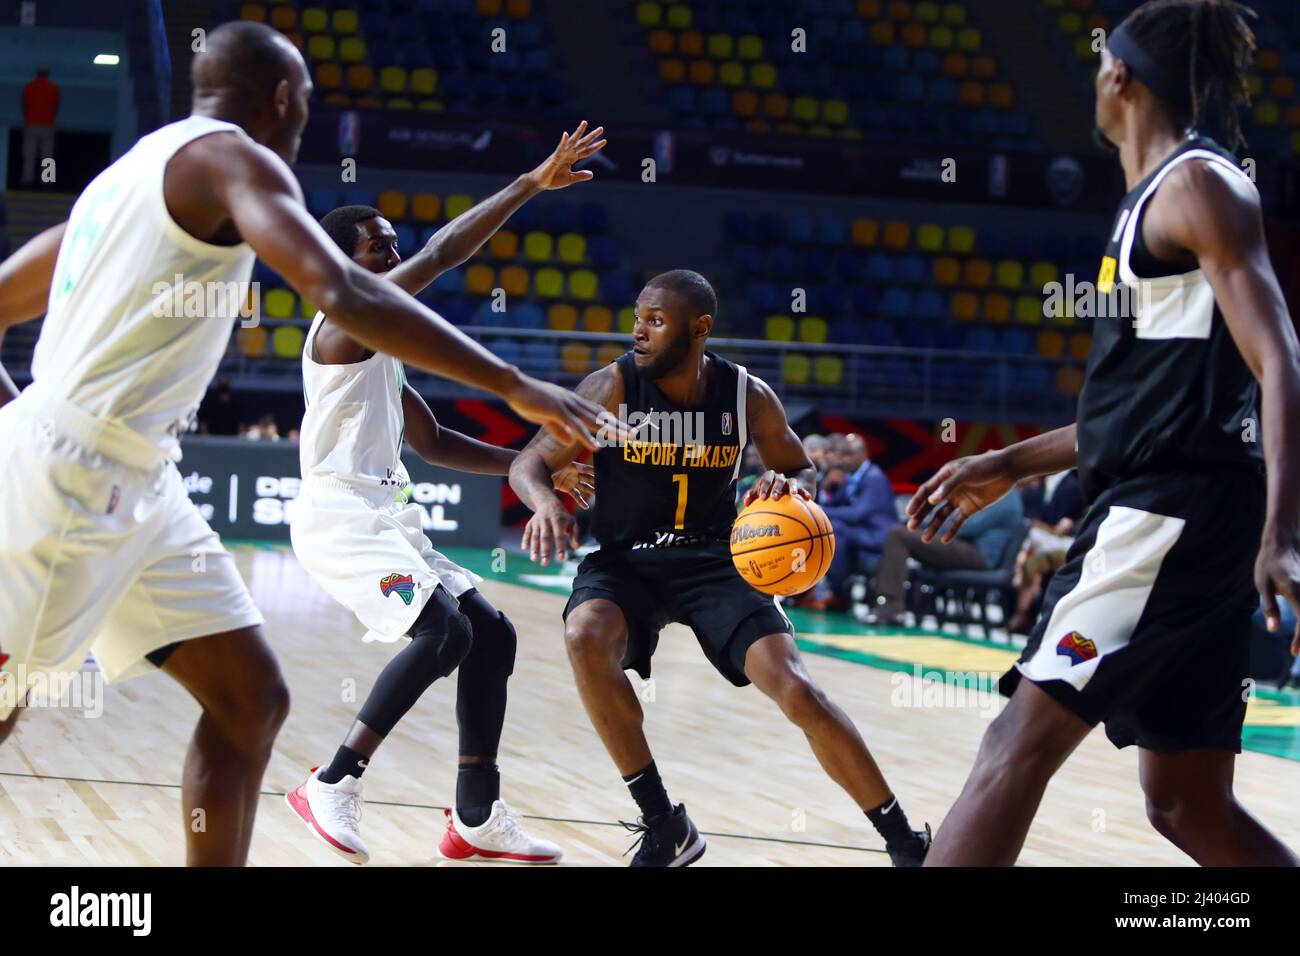 Cairo, Egypt. 10th Apr, 2022. Narcisse Greg Ambanza (2nd R) of BC Espoir Fukash dribbles the ball during the match between Forces Armees et Police Basketball (FAP) of Cameroon and BC Espoir Fukash of Congo at the 2022 Basketball Africa League (BAL) in Cairo, Egypt, on April 10, 2022. Credit: Ahmed Gomaa/Xinhua/Alamy Live News Stock Photo